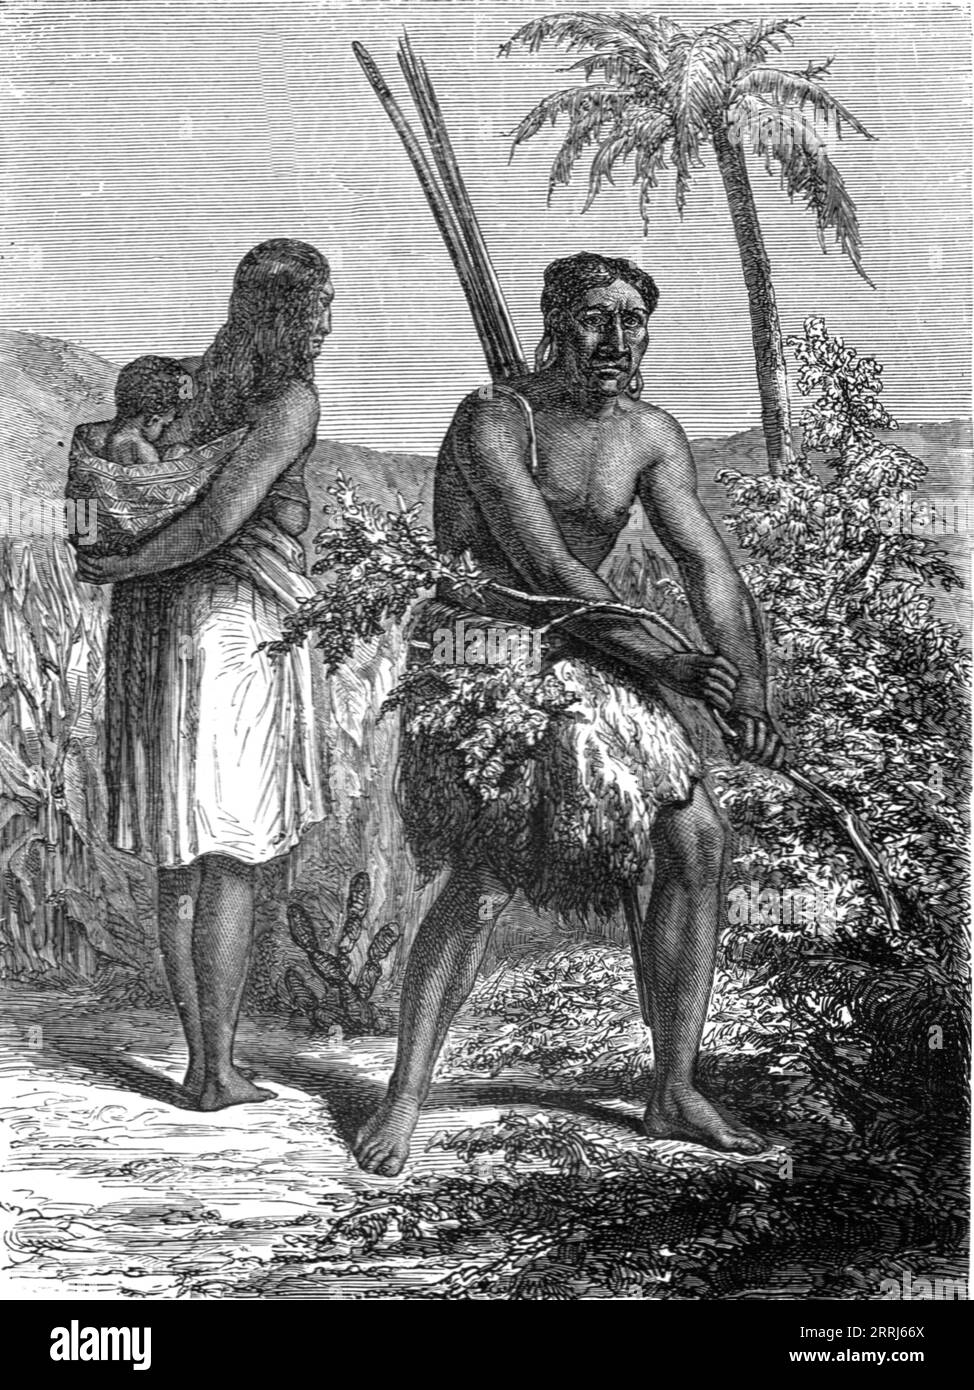 'Indians of the Gran Chaco; A visit to Paraguay during the war', 1875. From, 'Illustrated Travels' by H.W. Bates. [Cassell, Petter, and Galpin, c1880, London] Stock Photo